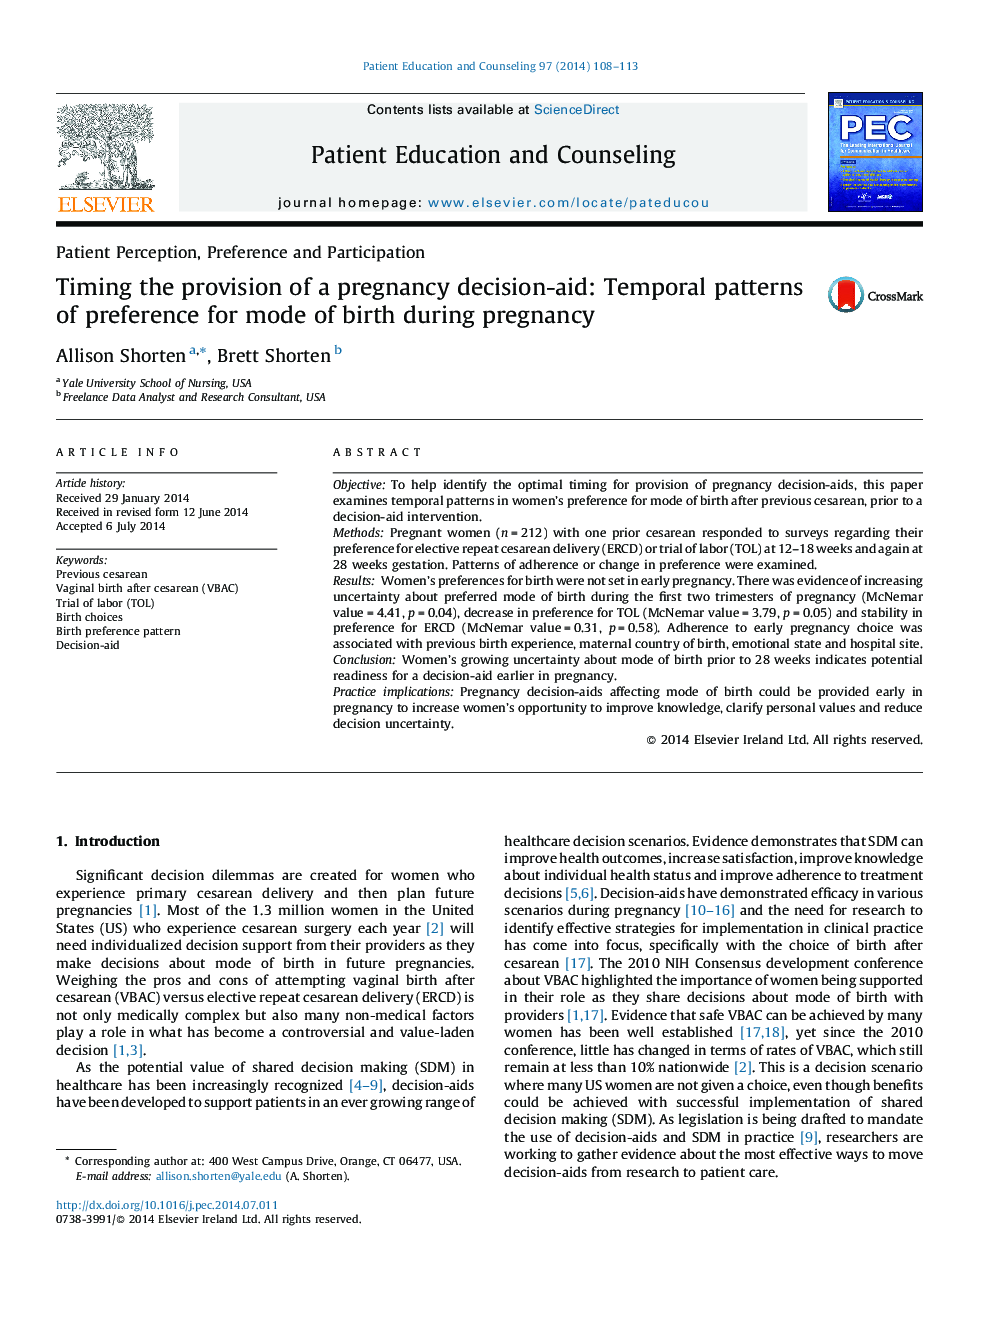 Timing the provision of a pregnancy decision-aid: Temporal patterns of preference for mode of birth during pregnancy